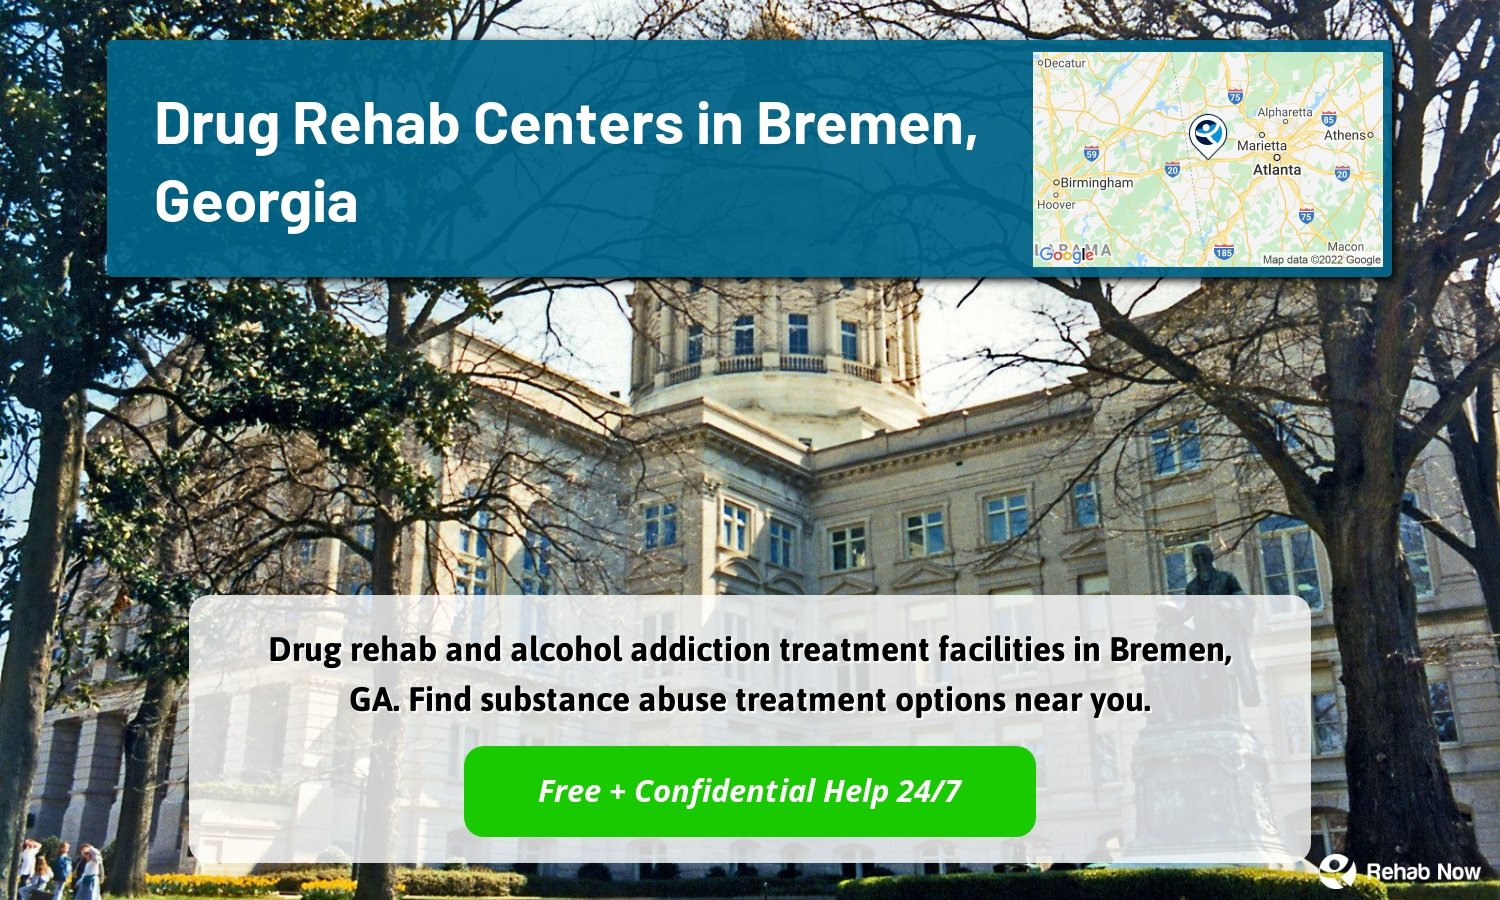 Drug rehab and alcohol addiction treatment facilities in Bremen, GA. Find substance abuse treatment options near you.